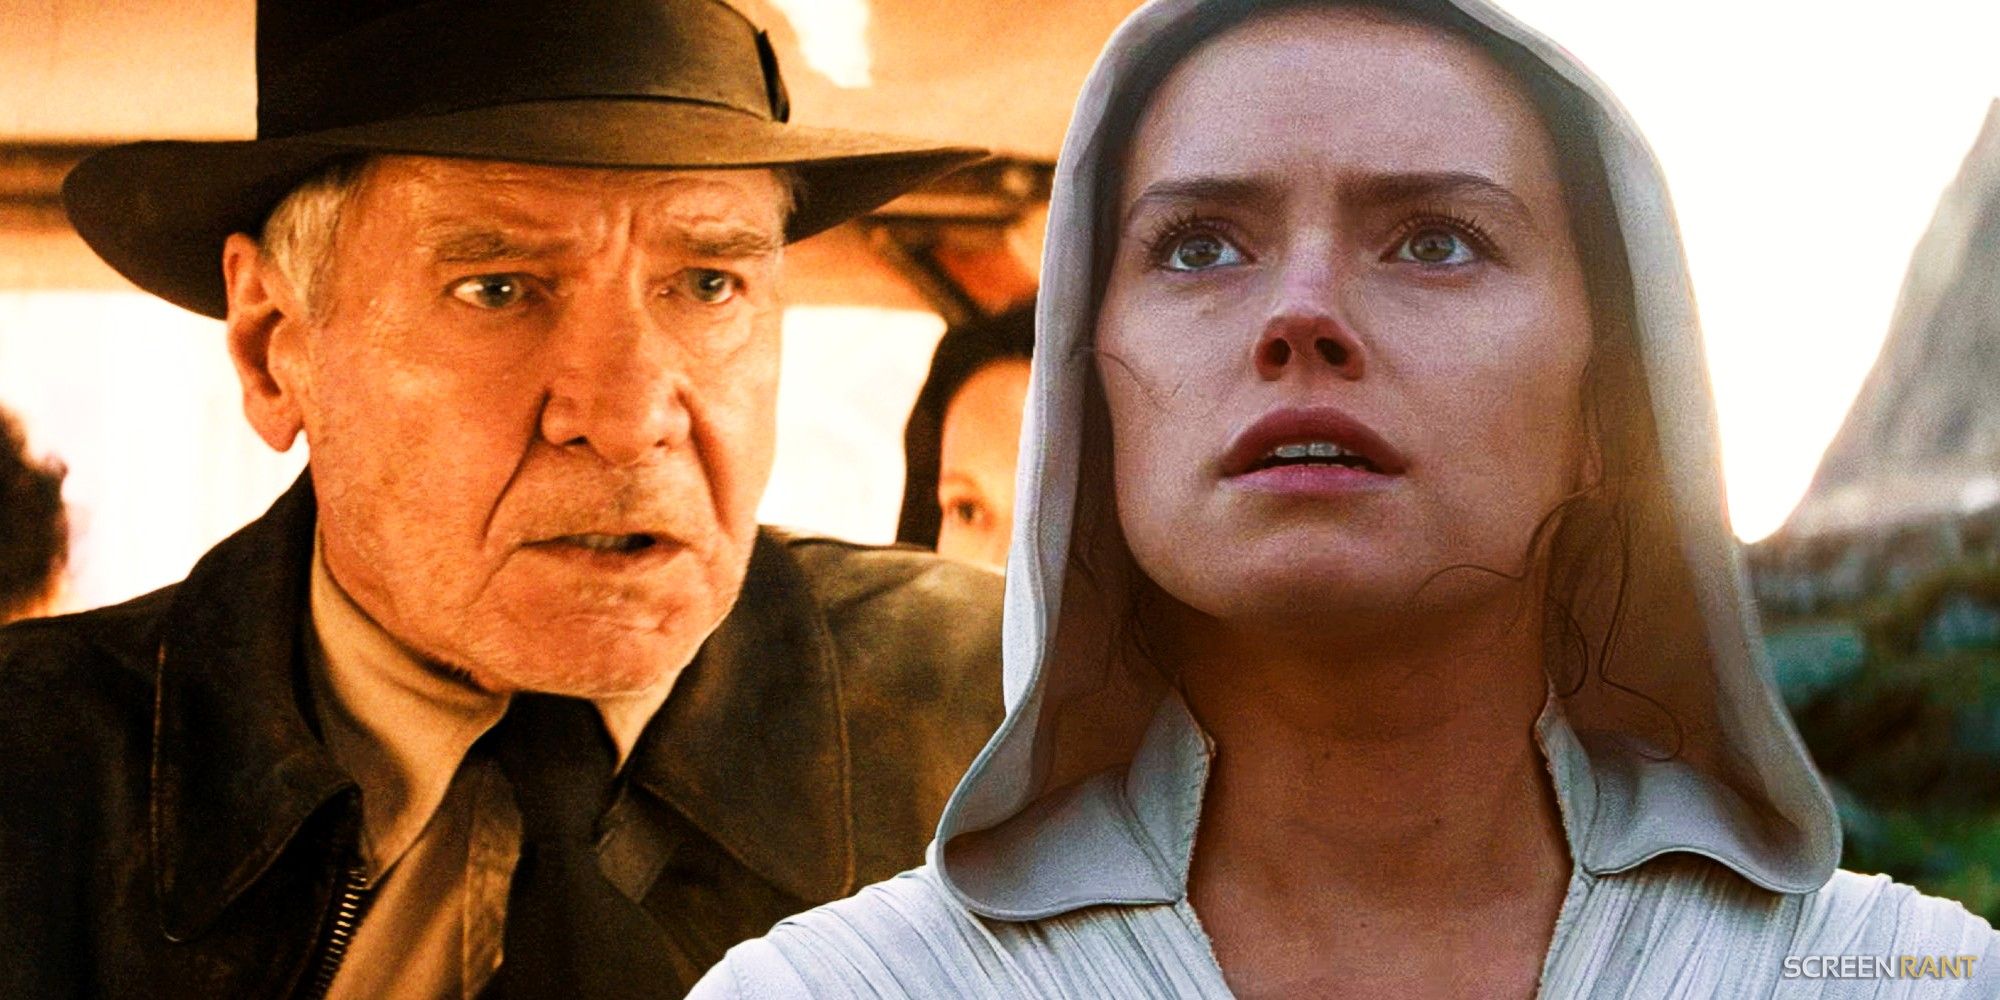 Two Star Wars Movies Now Coming in 2026 Five Months Apart